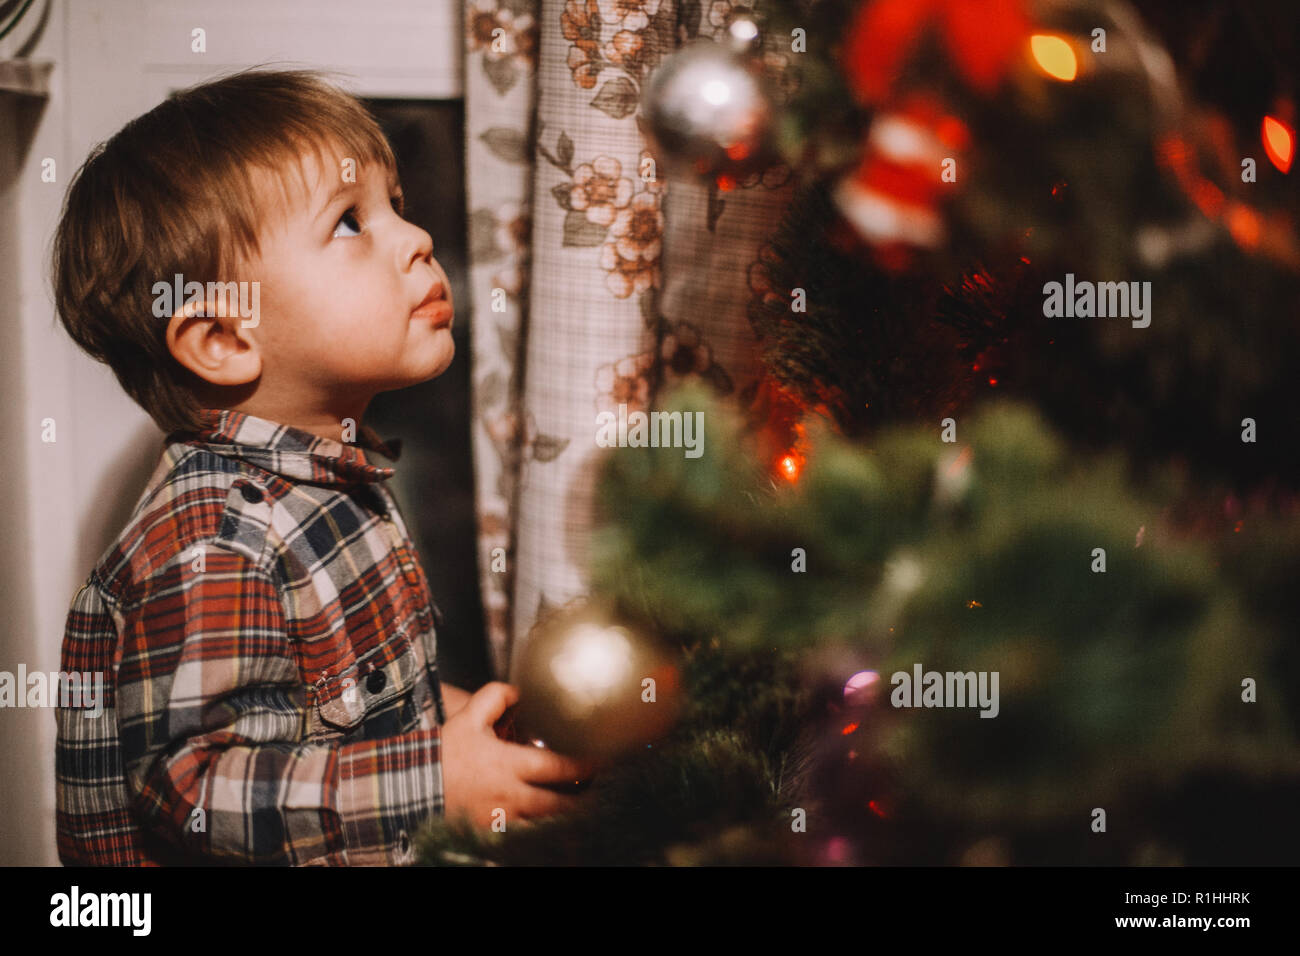 Baby boy looking at Christmas ornaments while standing beside Christmas tree at home Stock Photo